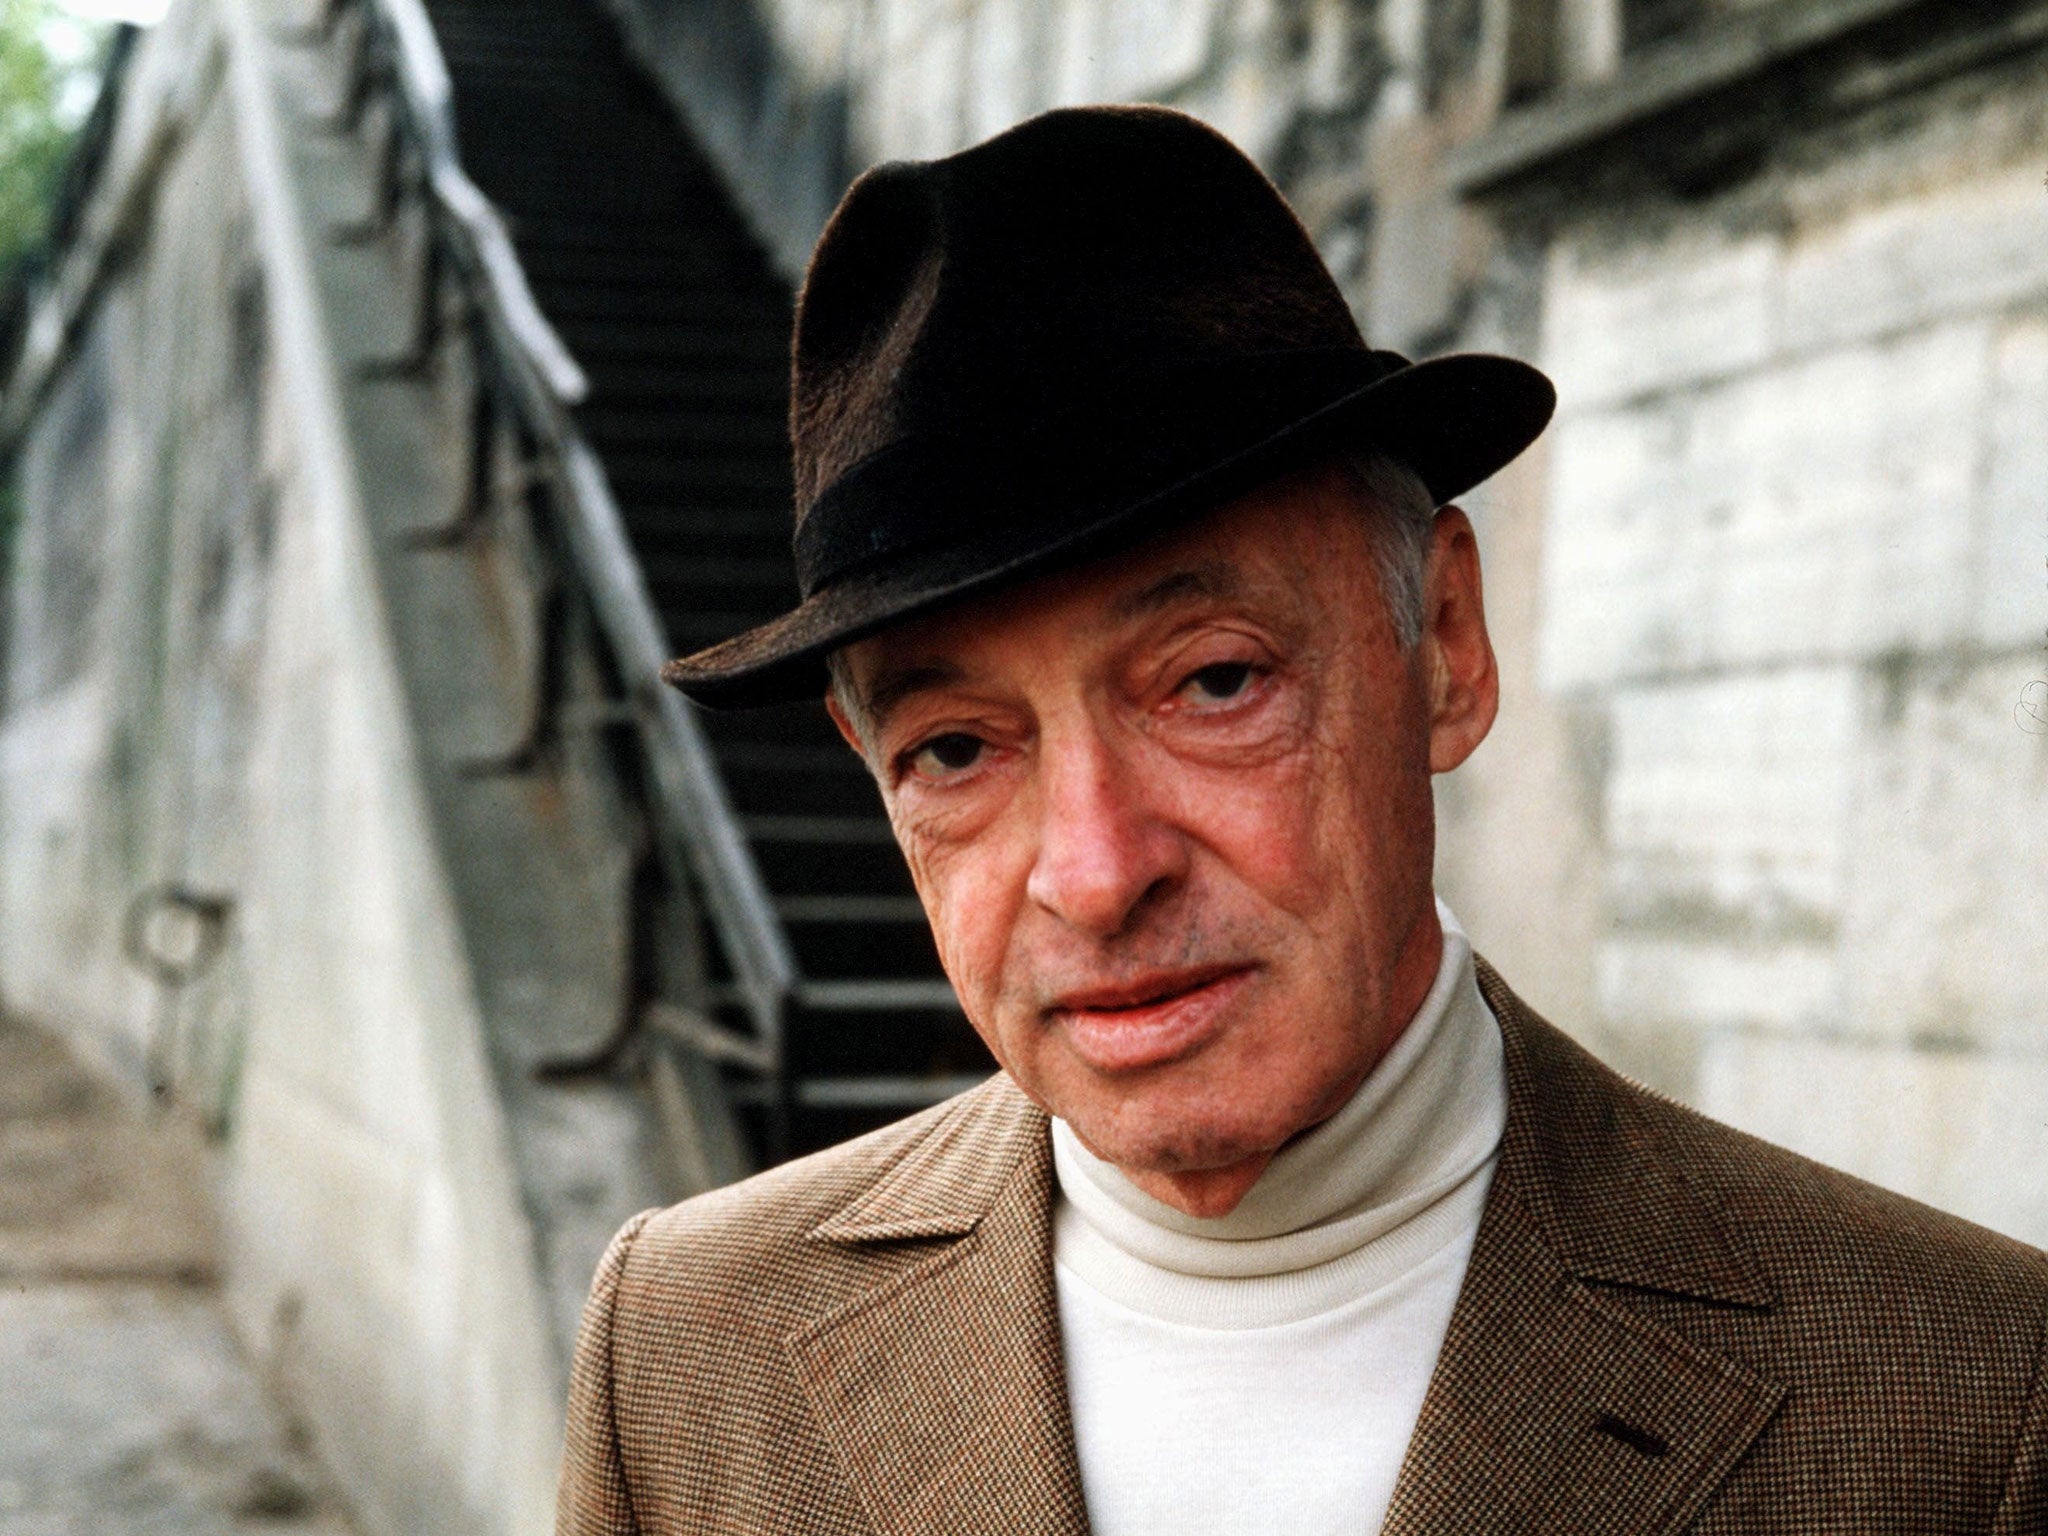 Precociously intelligent and creative: Writer Saul Bellow